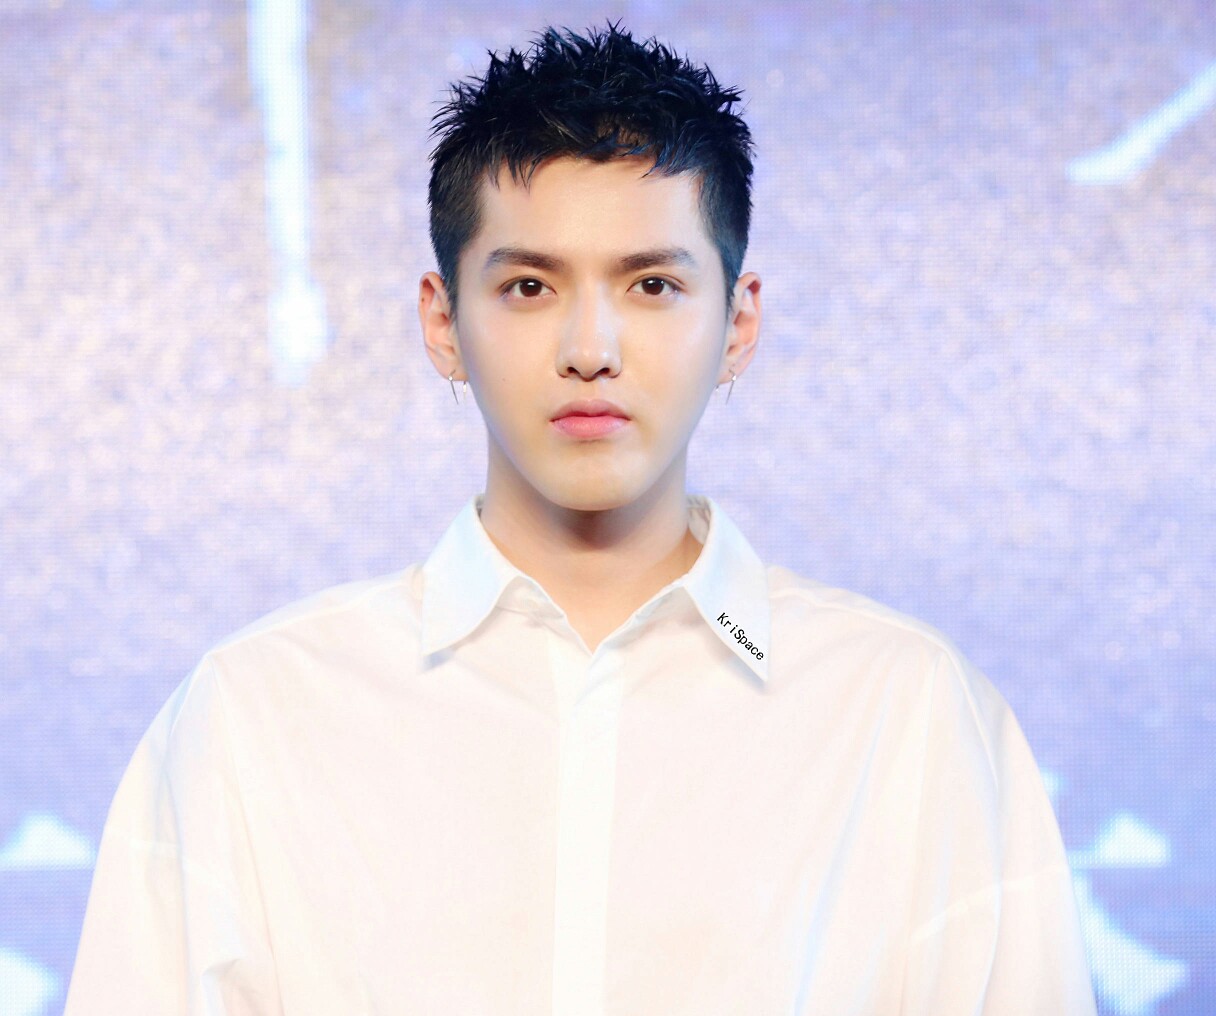 Kris Wu's Mother Cried And Begged Jackie Chan To Save Her Son, She Was  Exhausted And Had To Be Hospitalized! - LOVEKPOP95